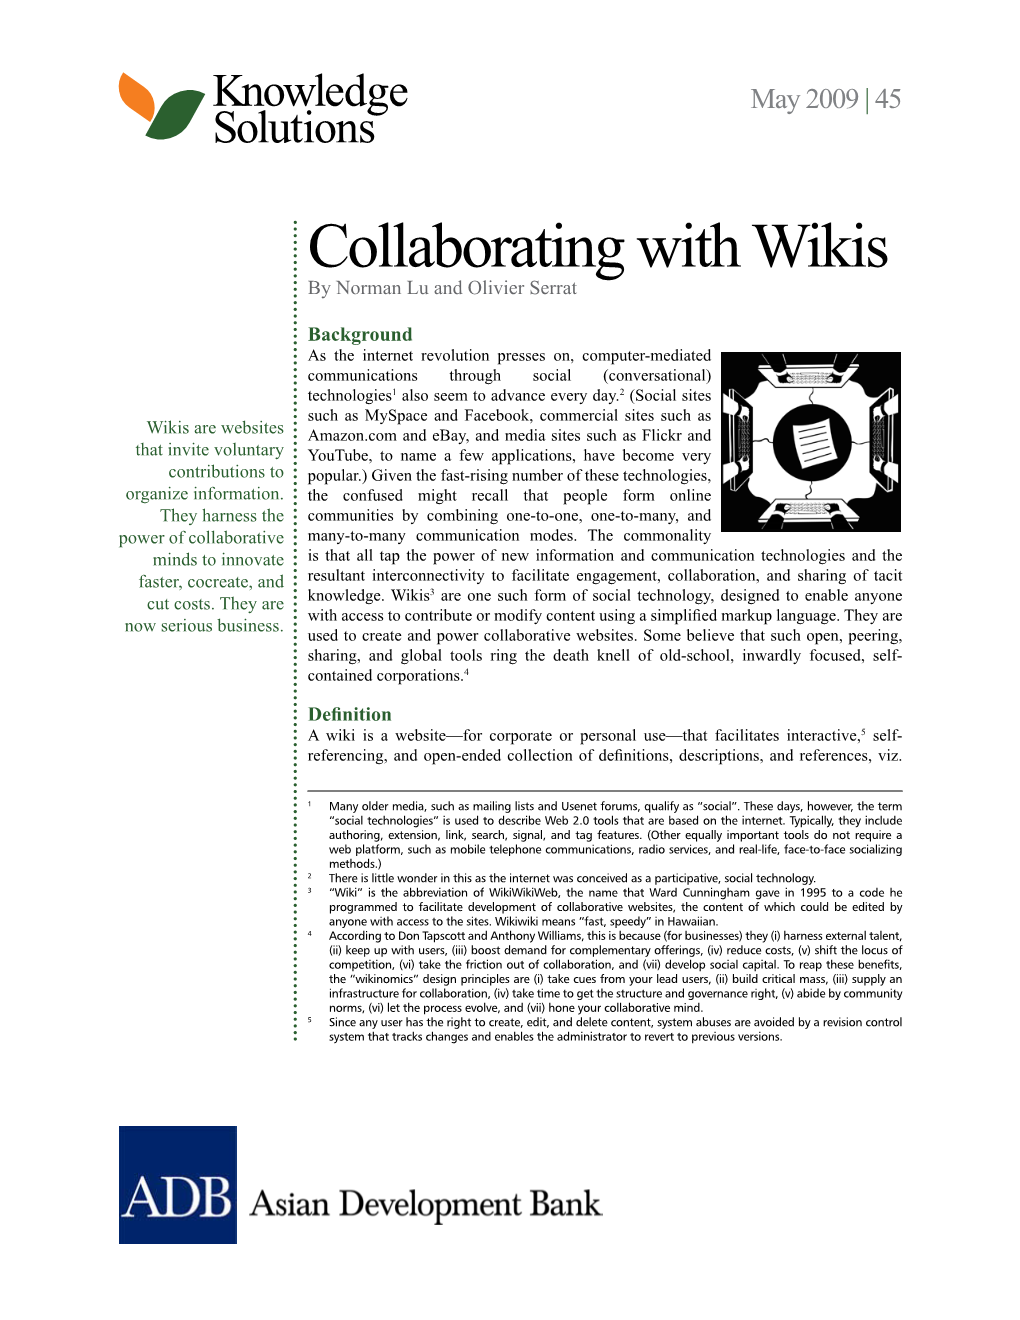 Collaborating with Wikis by Norman Lu and Olivier Serrat